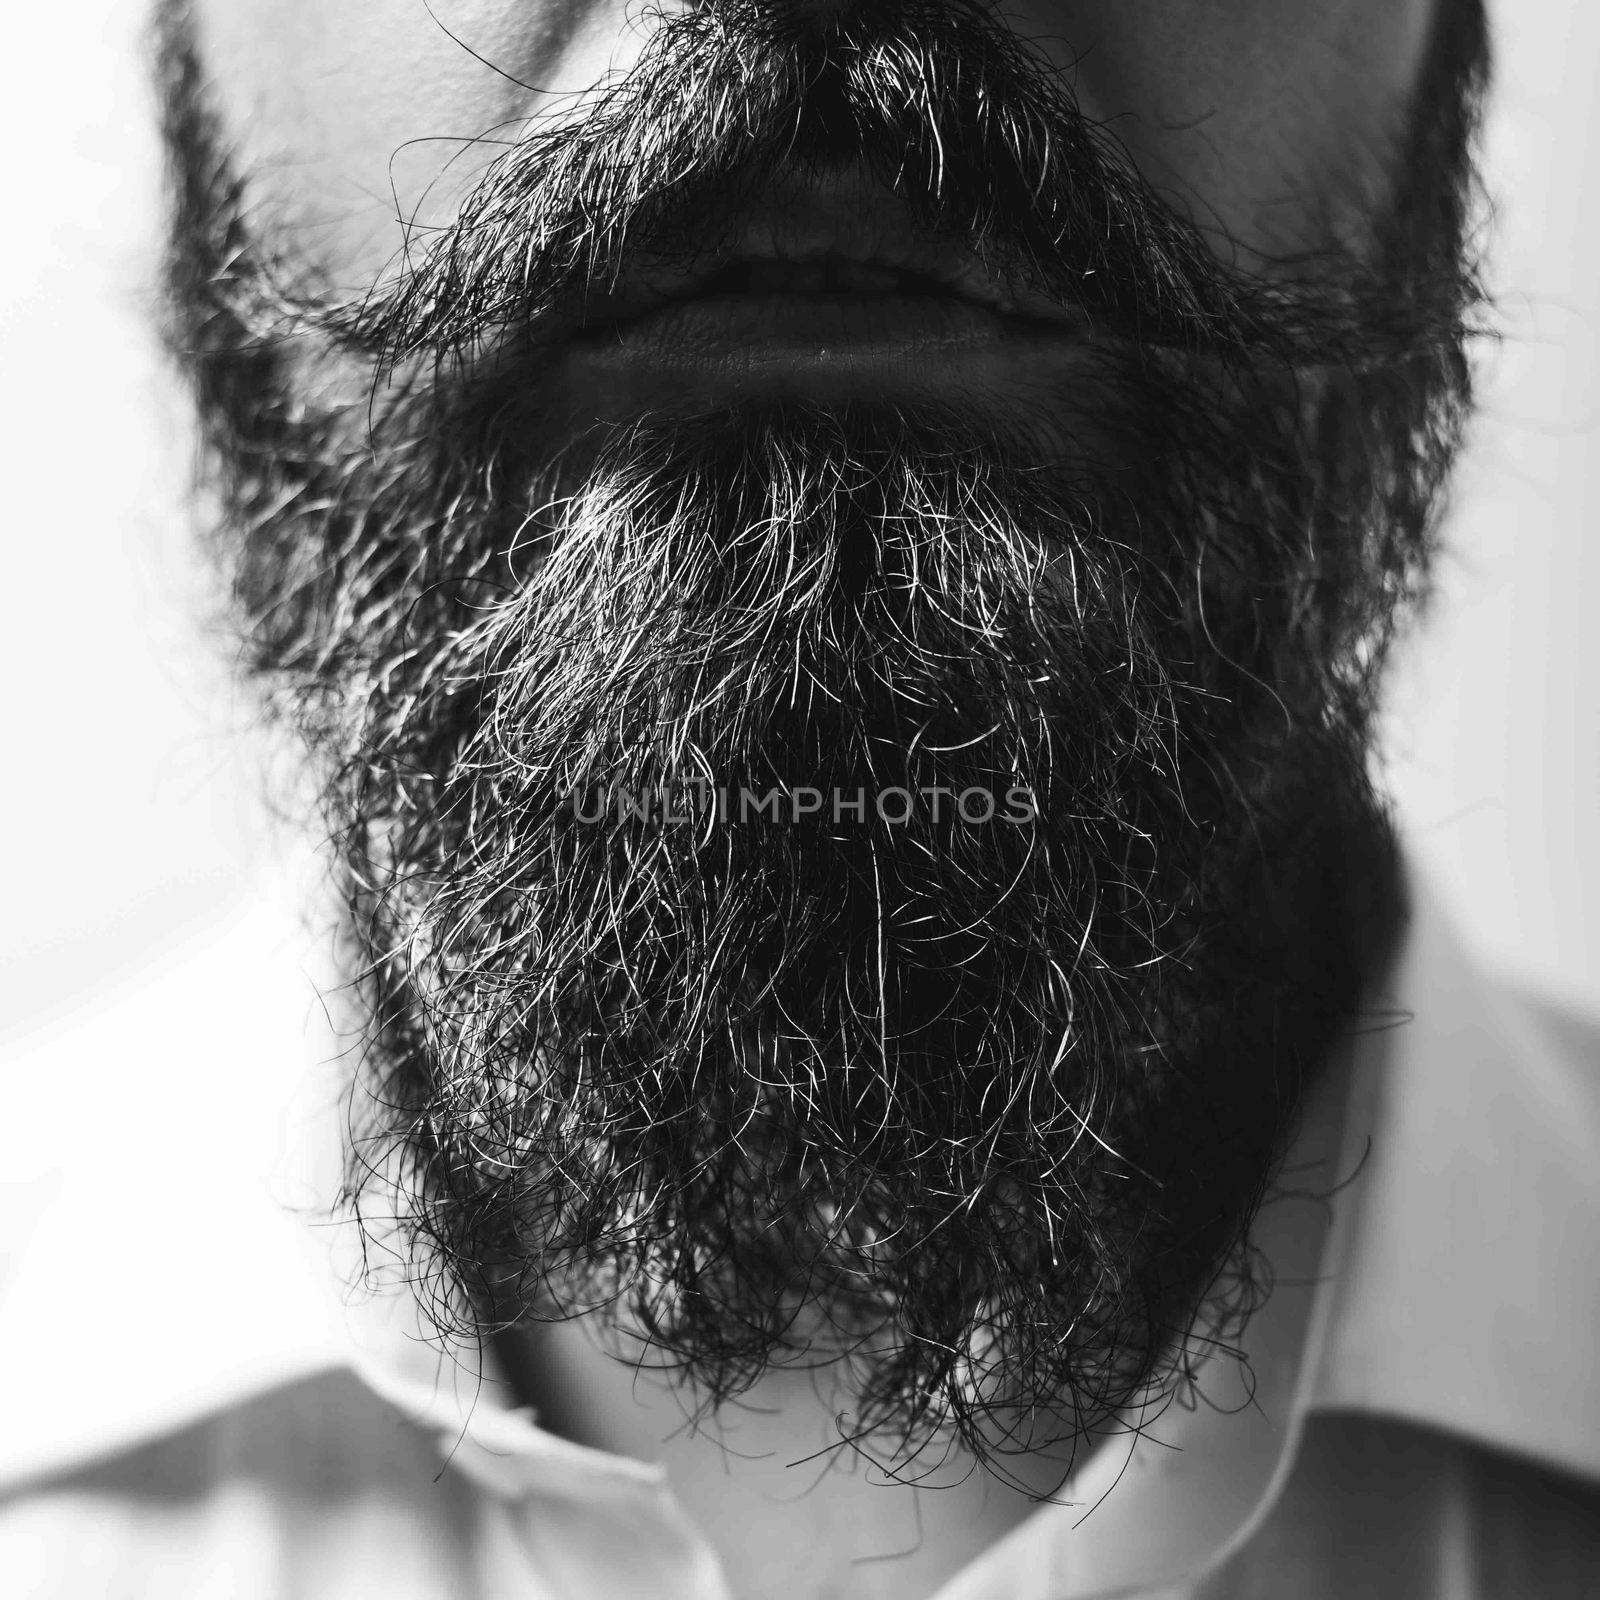 Close up of long beard and mustache man with white shirt